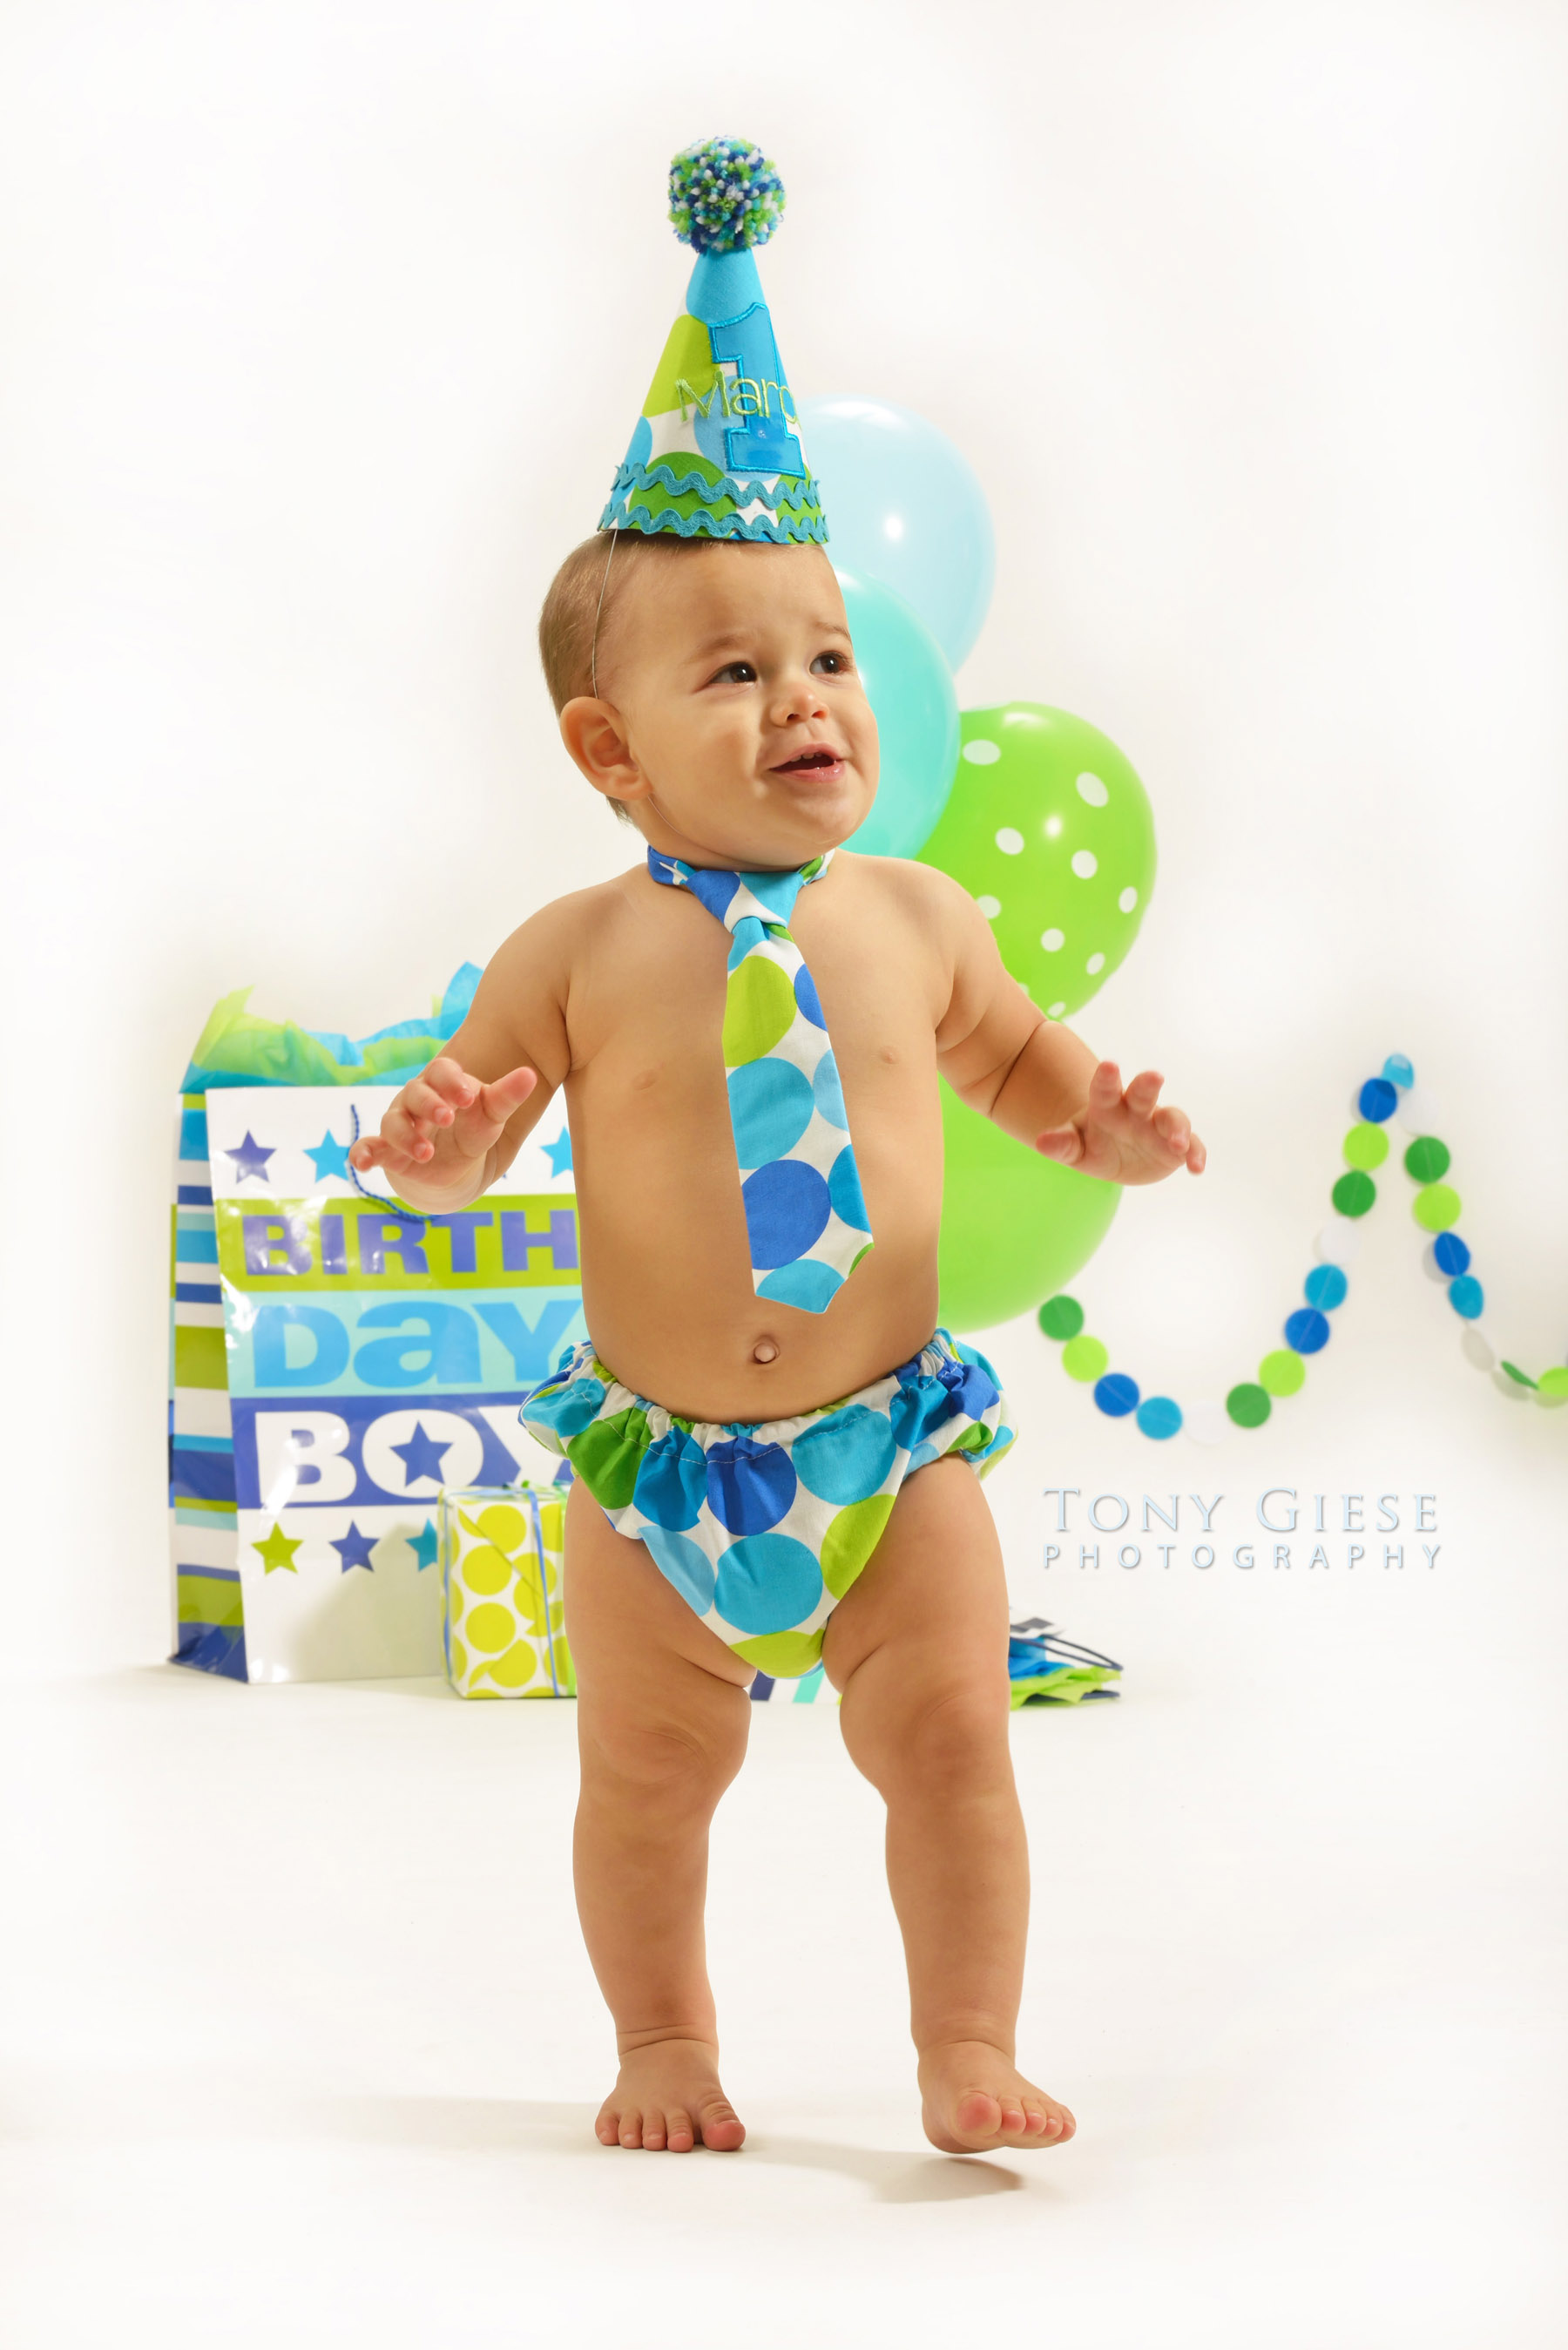 First year birthday photography by Tony Giese Photography